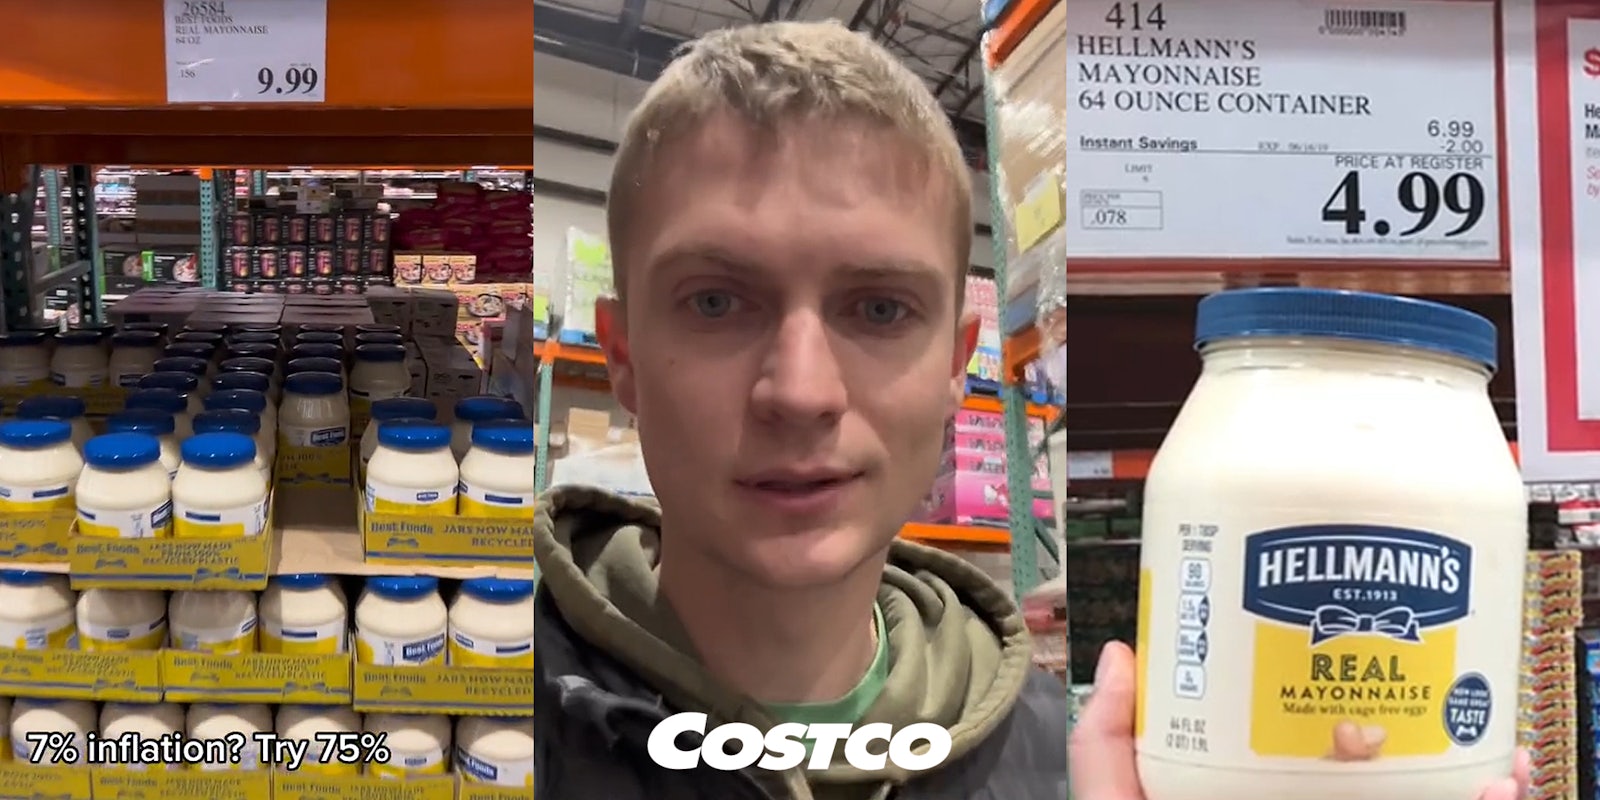 Costco shelving with mayonnaise priced at 9.99 with caption '7% inflation? Try 75%' (l) man speaking in Costco wit Costco logo at bottom (c) man holding mayonnaise priced at 4.99 (r)